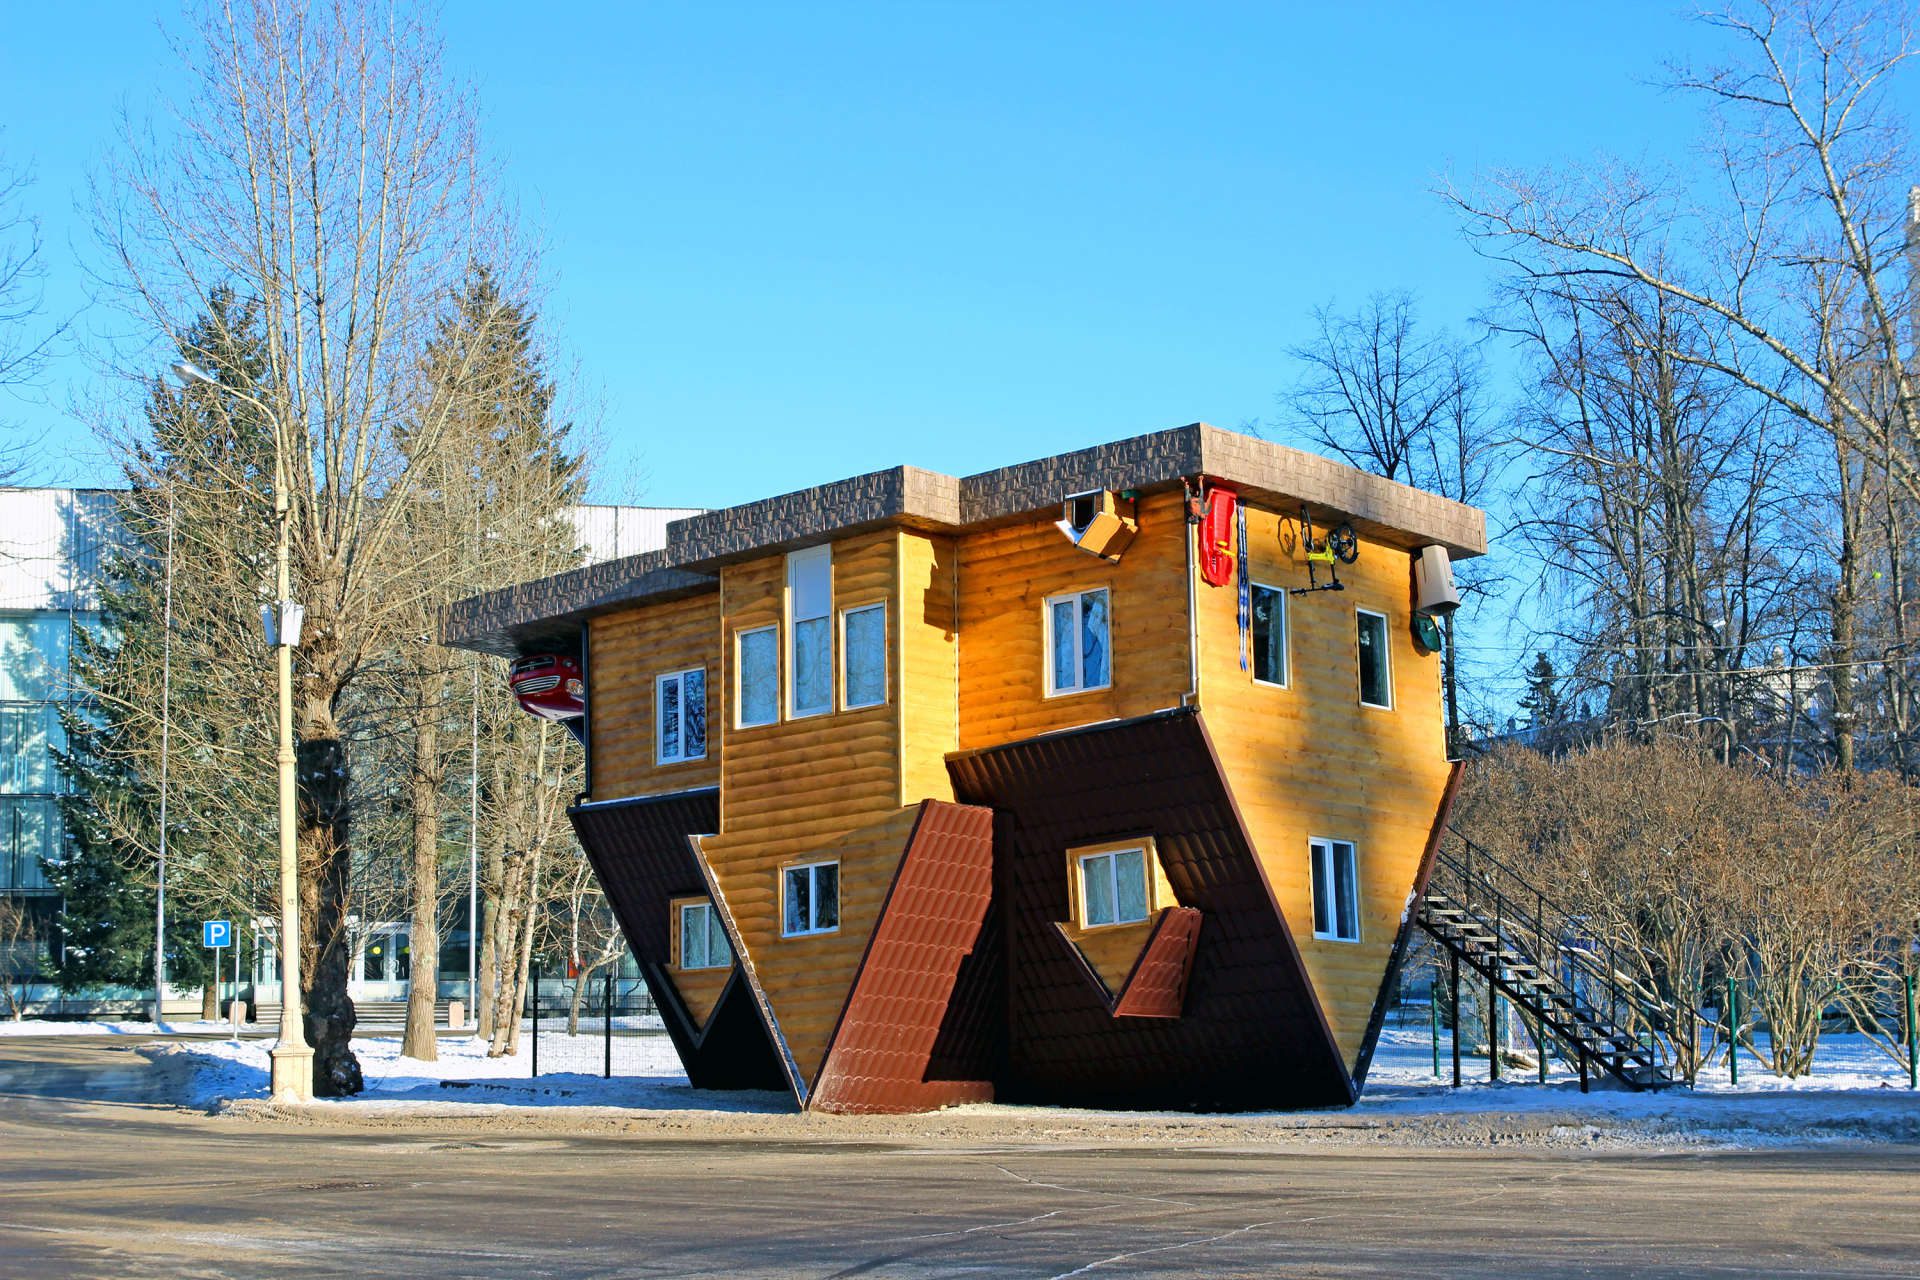 Weird Places: The Upside-down House - KLM Blog